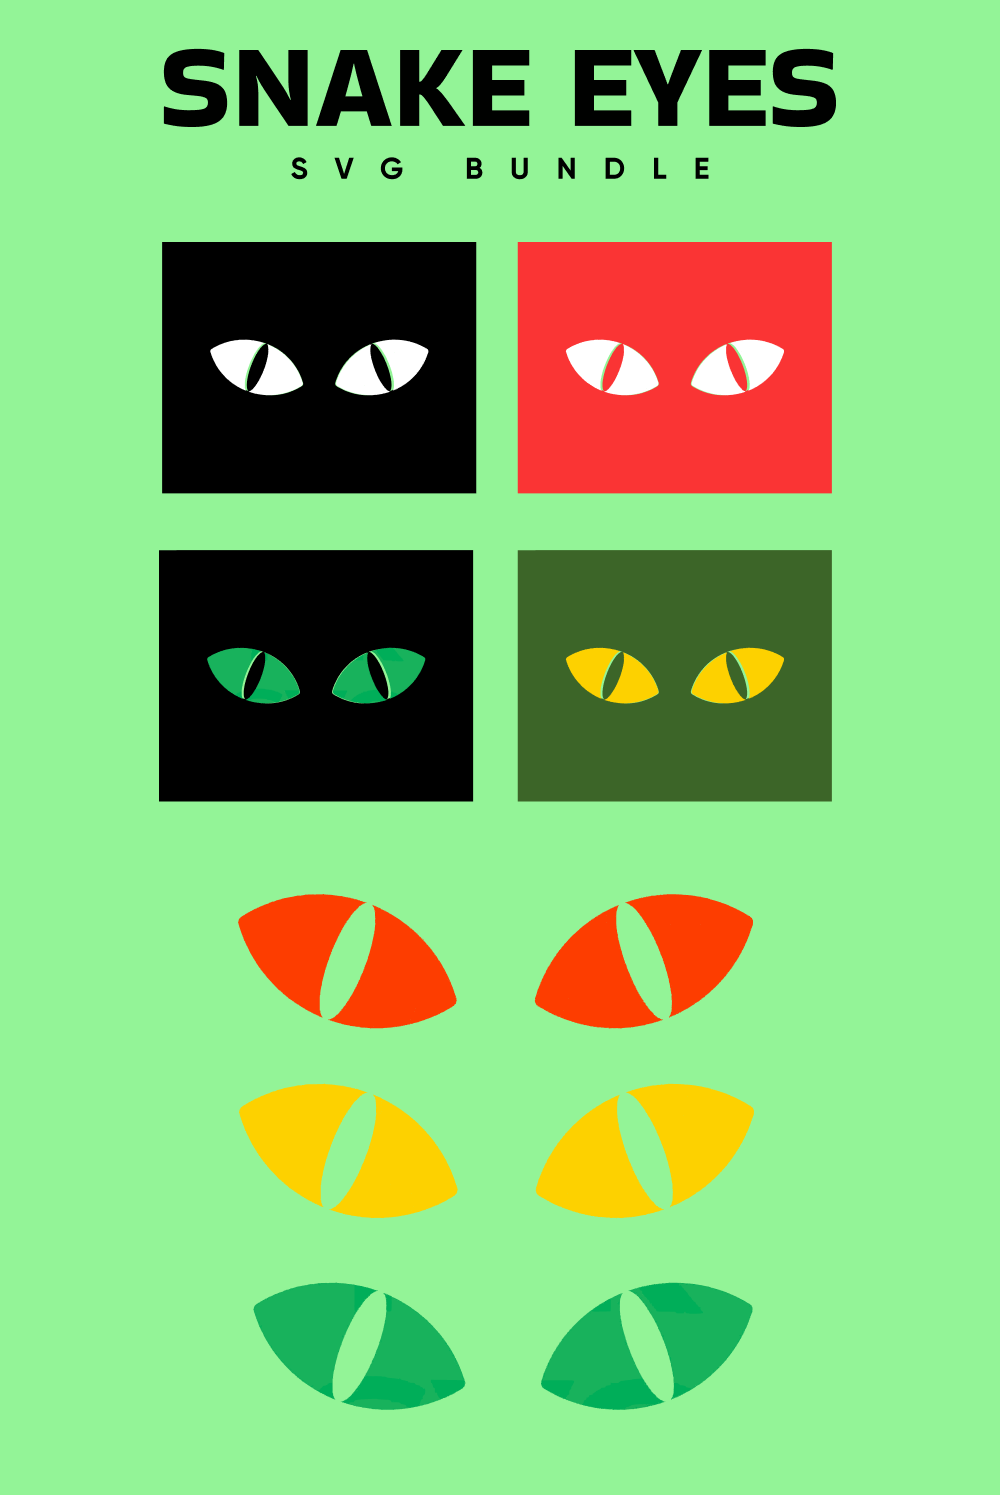 Poster with different colors of eyes on it.